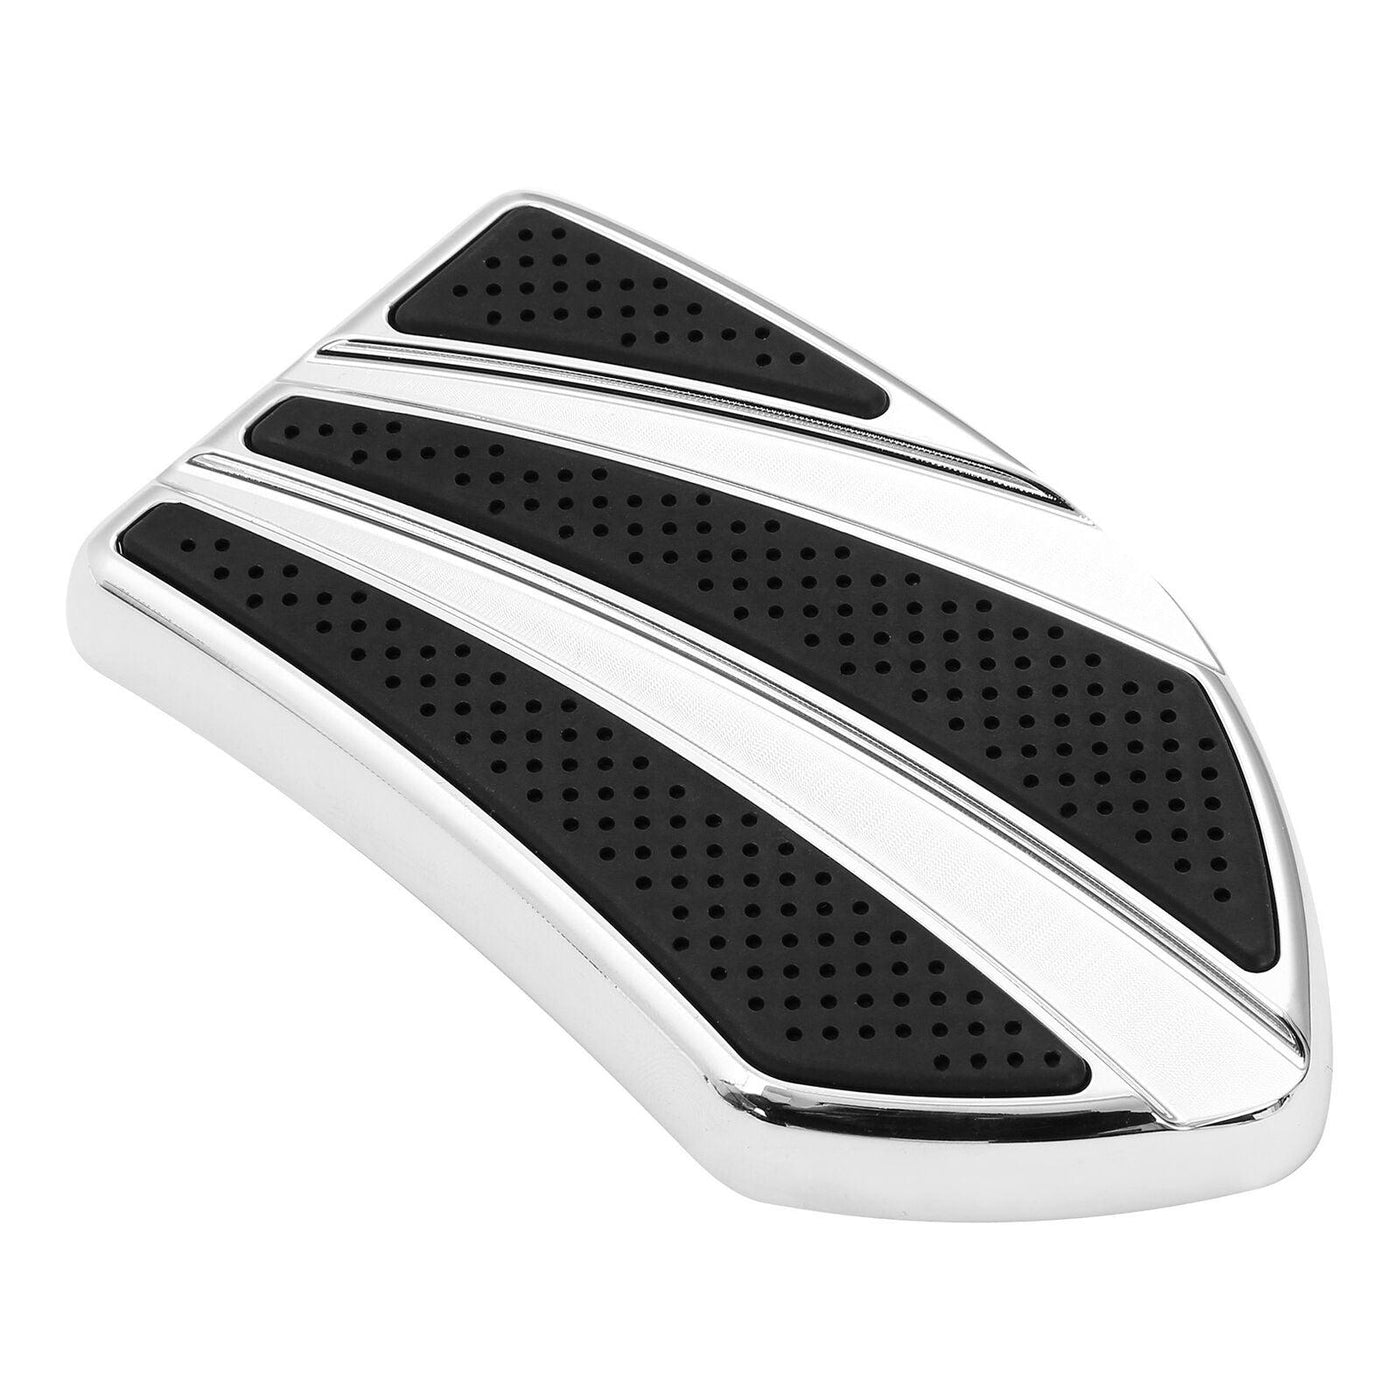 Large Brake Pedal Pad Fit For Harley Electra Glide 80-21 Softail Slim FLS 12-17 - Moto Life Products